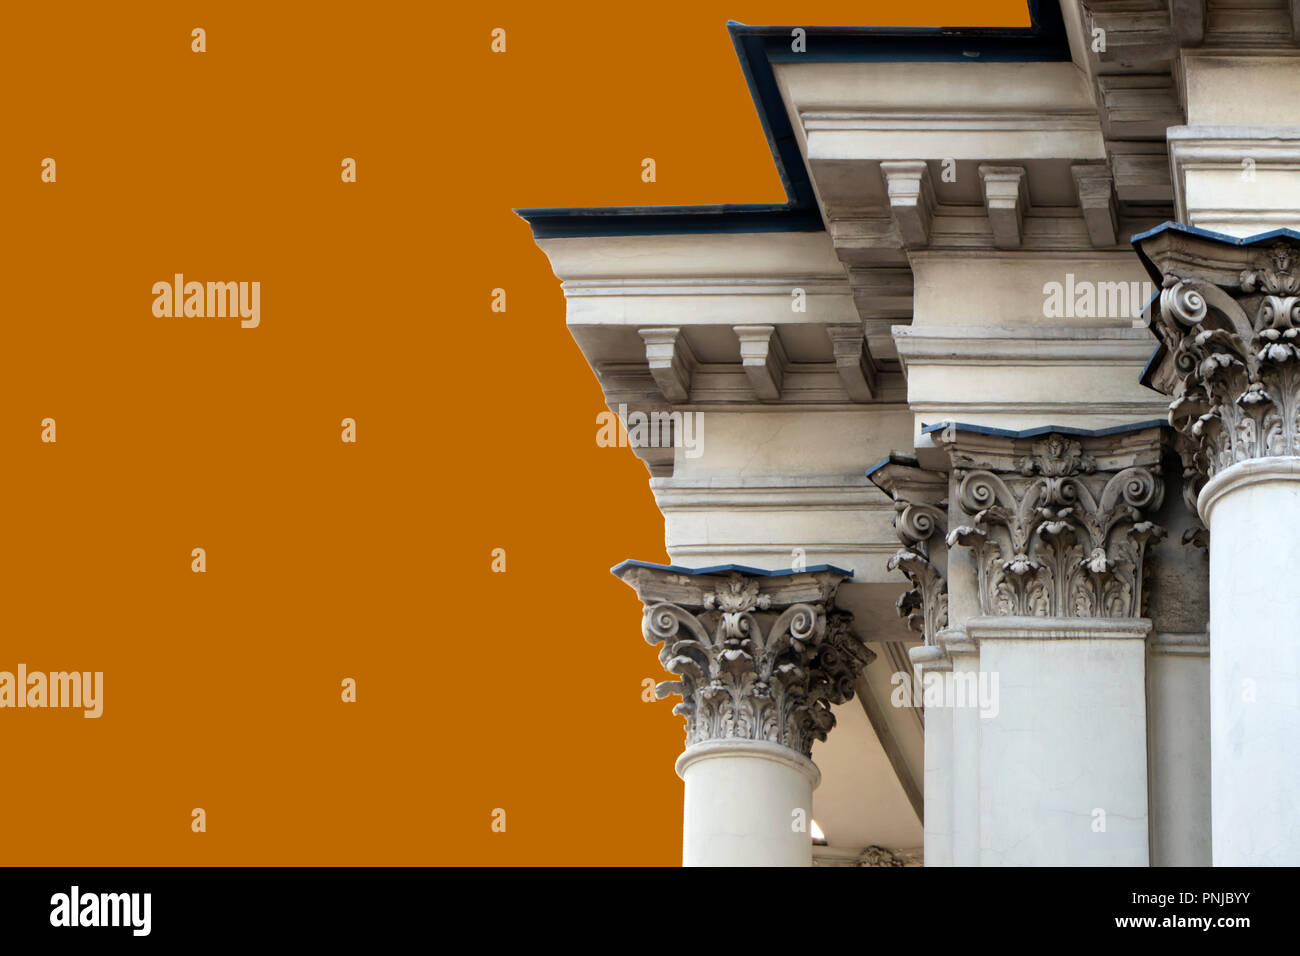 Cornice and ornate columns tops of old building of 19th century in classic style isolated on orange background Stock Photo